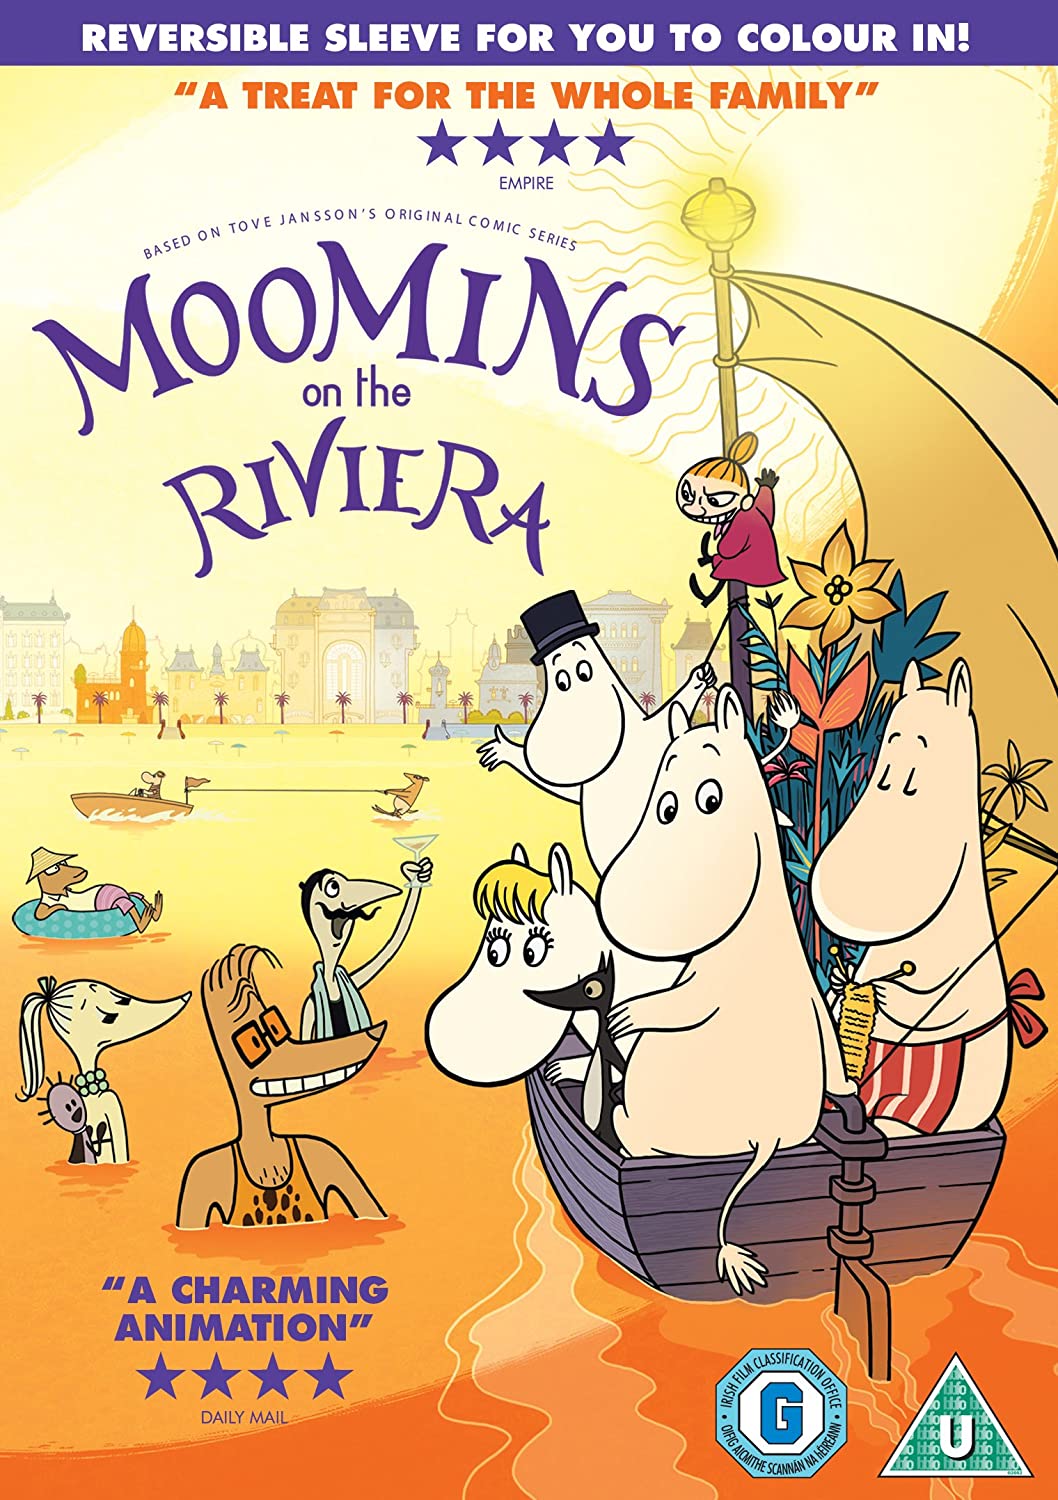 Moomins on the Riviera [2015] - Family/Comedy [DVD]